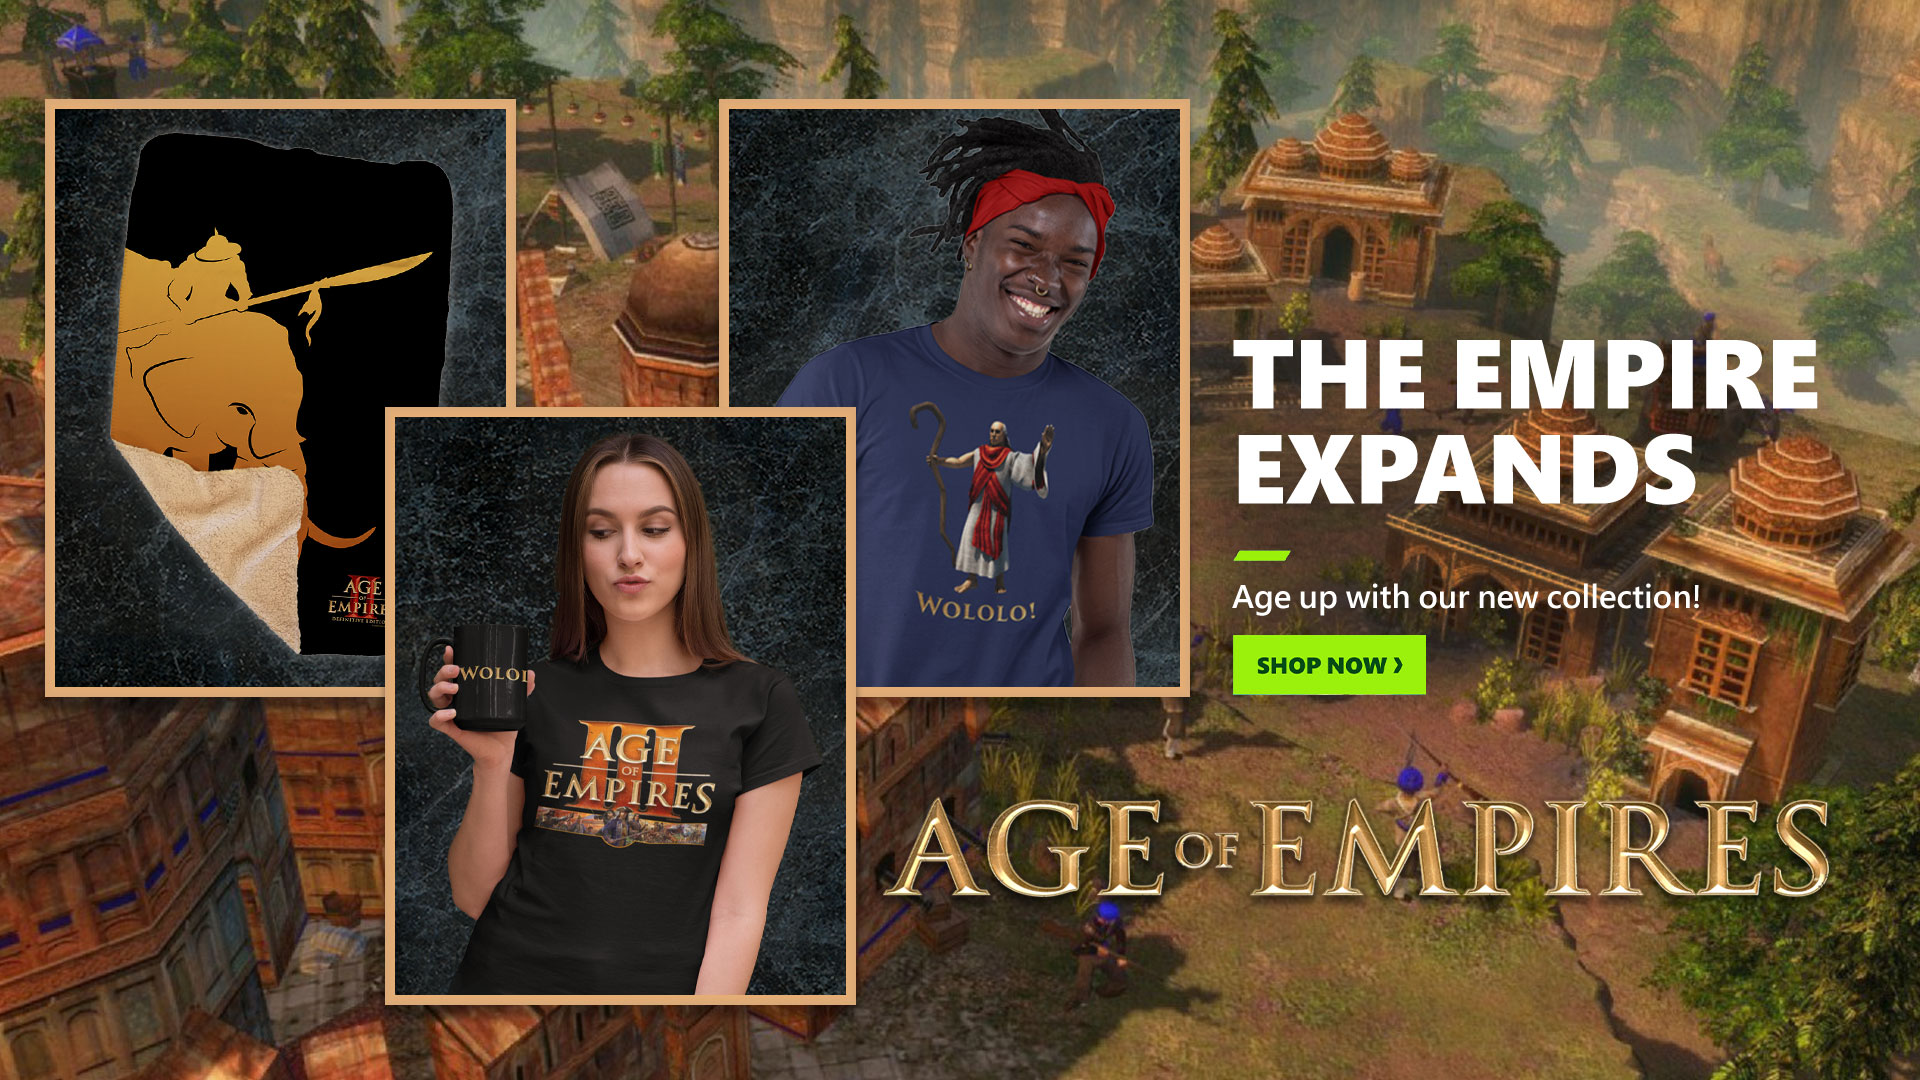 Promotional image showing items available in the Age of Empires Gear Store